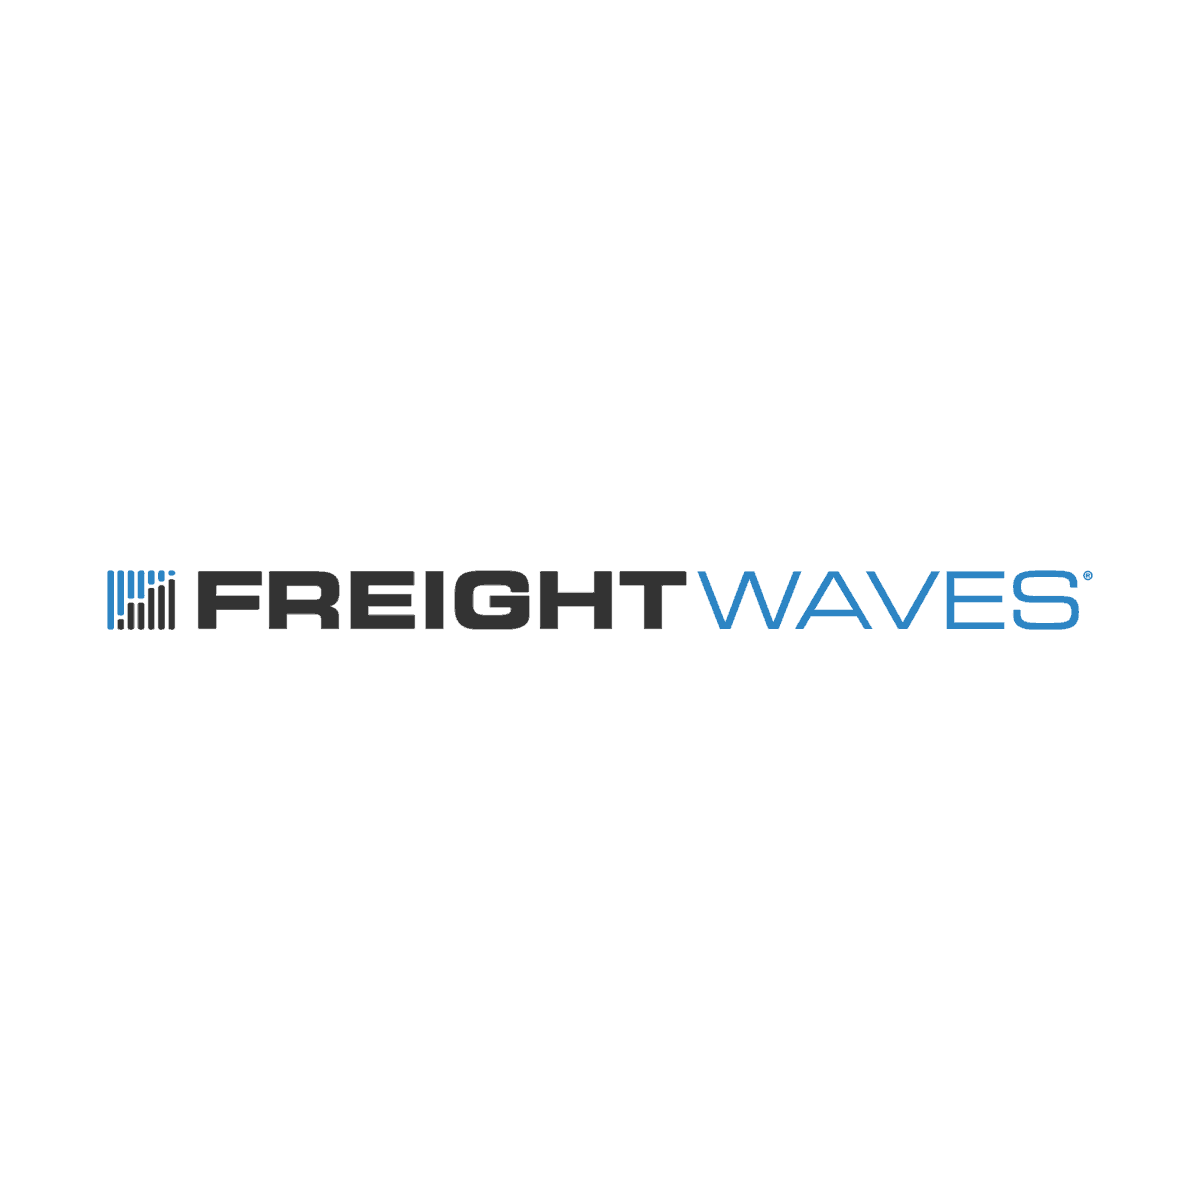 How  can deliver $1 items overnight for free - FreightWaves